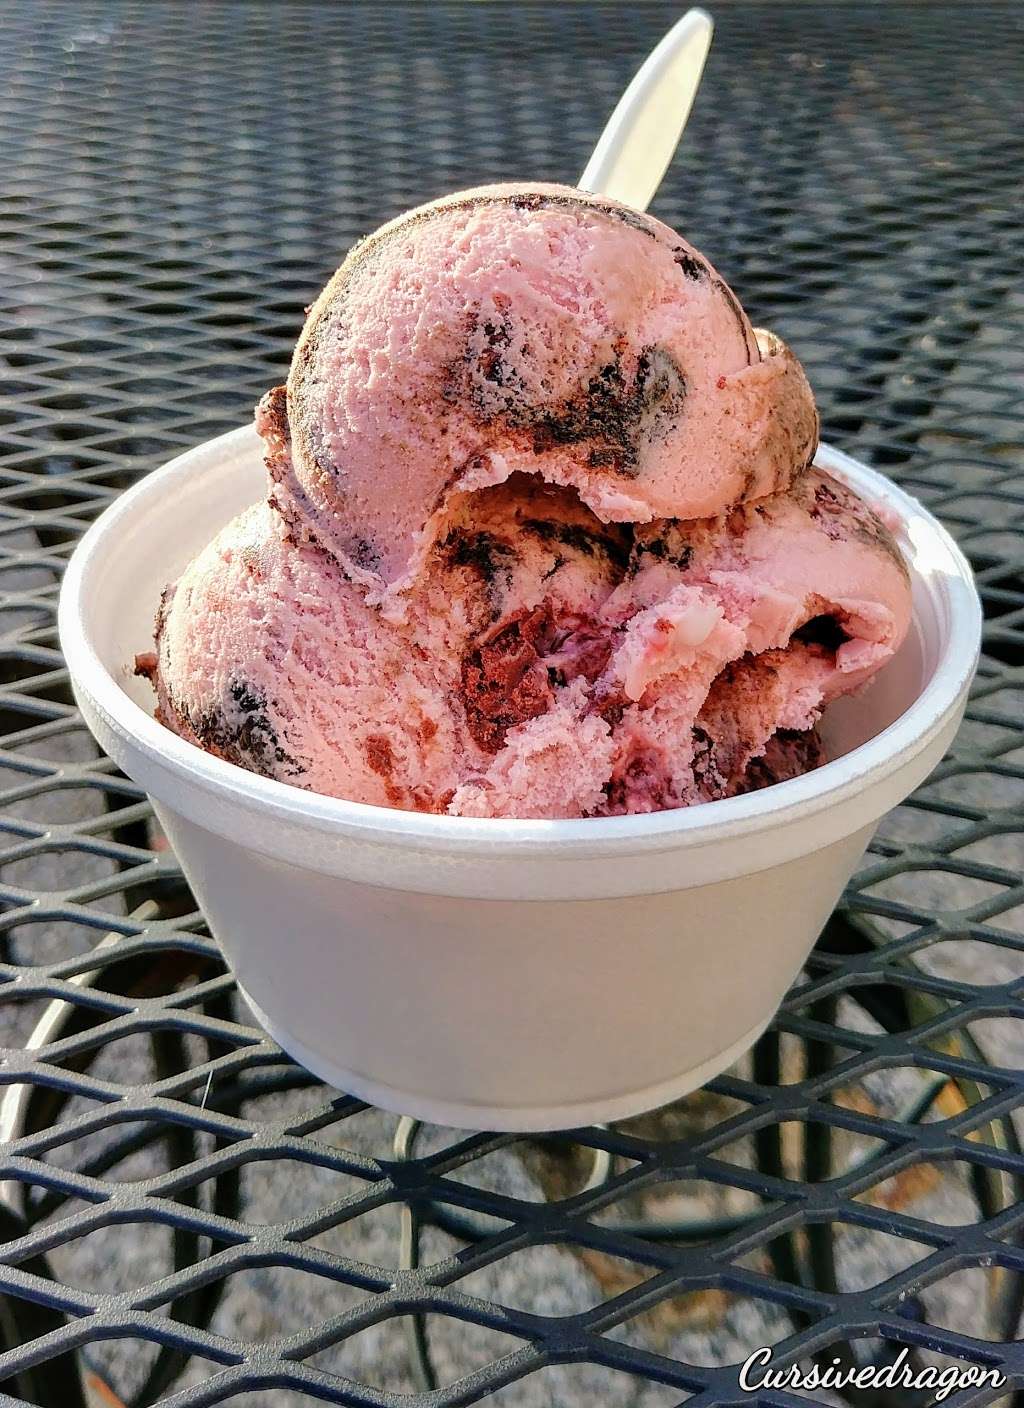 Uncle Wigglys Ice cream | 6911 York Rd, Baltimore, MD 21212 | Phone: (410) 377-3373